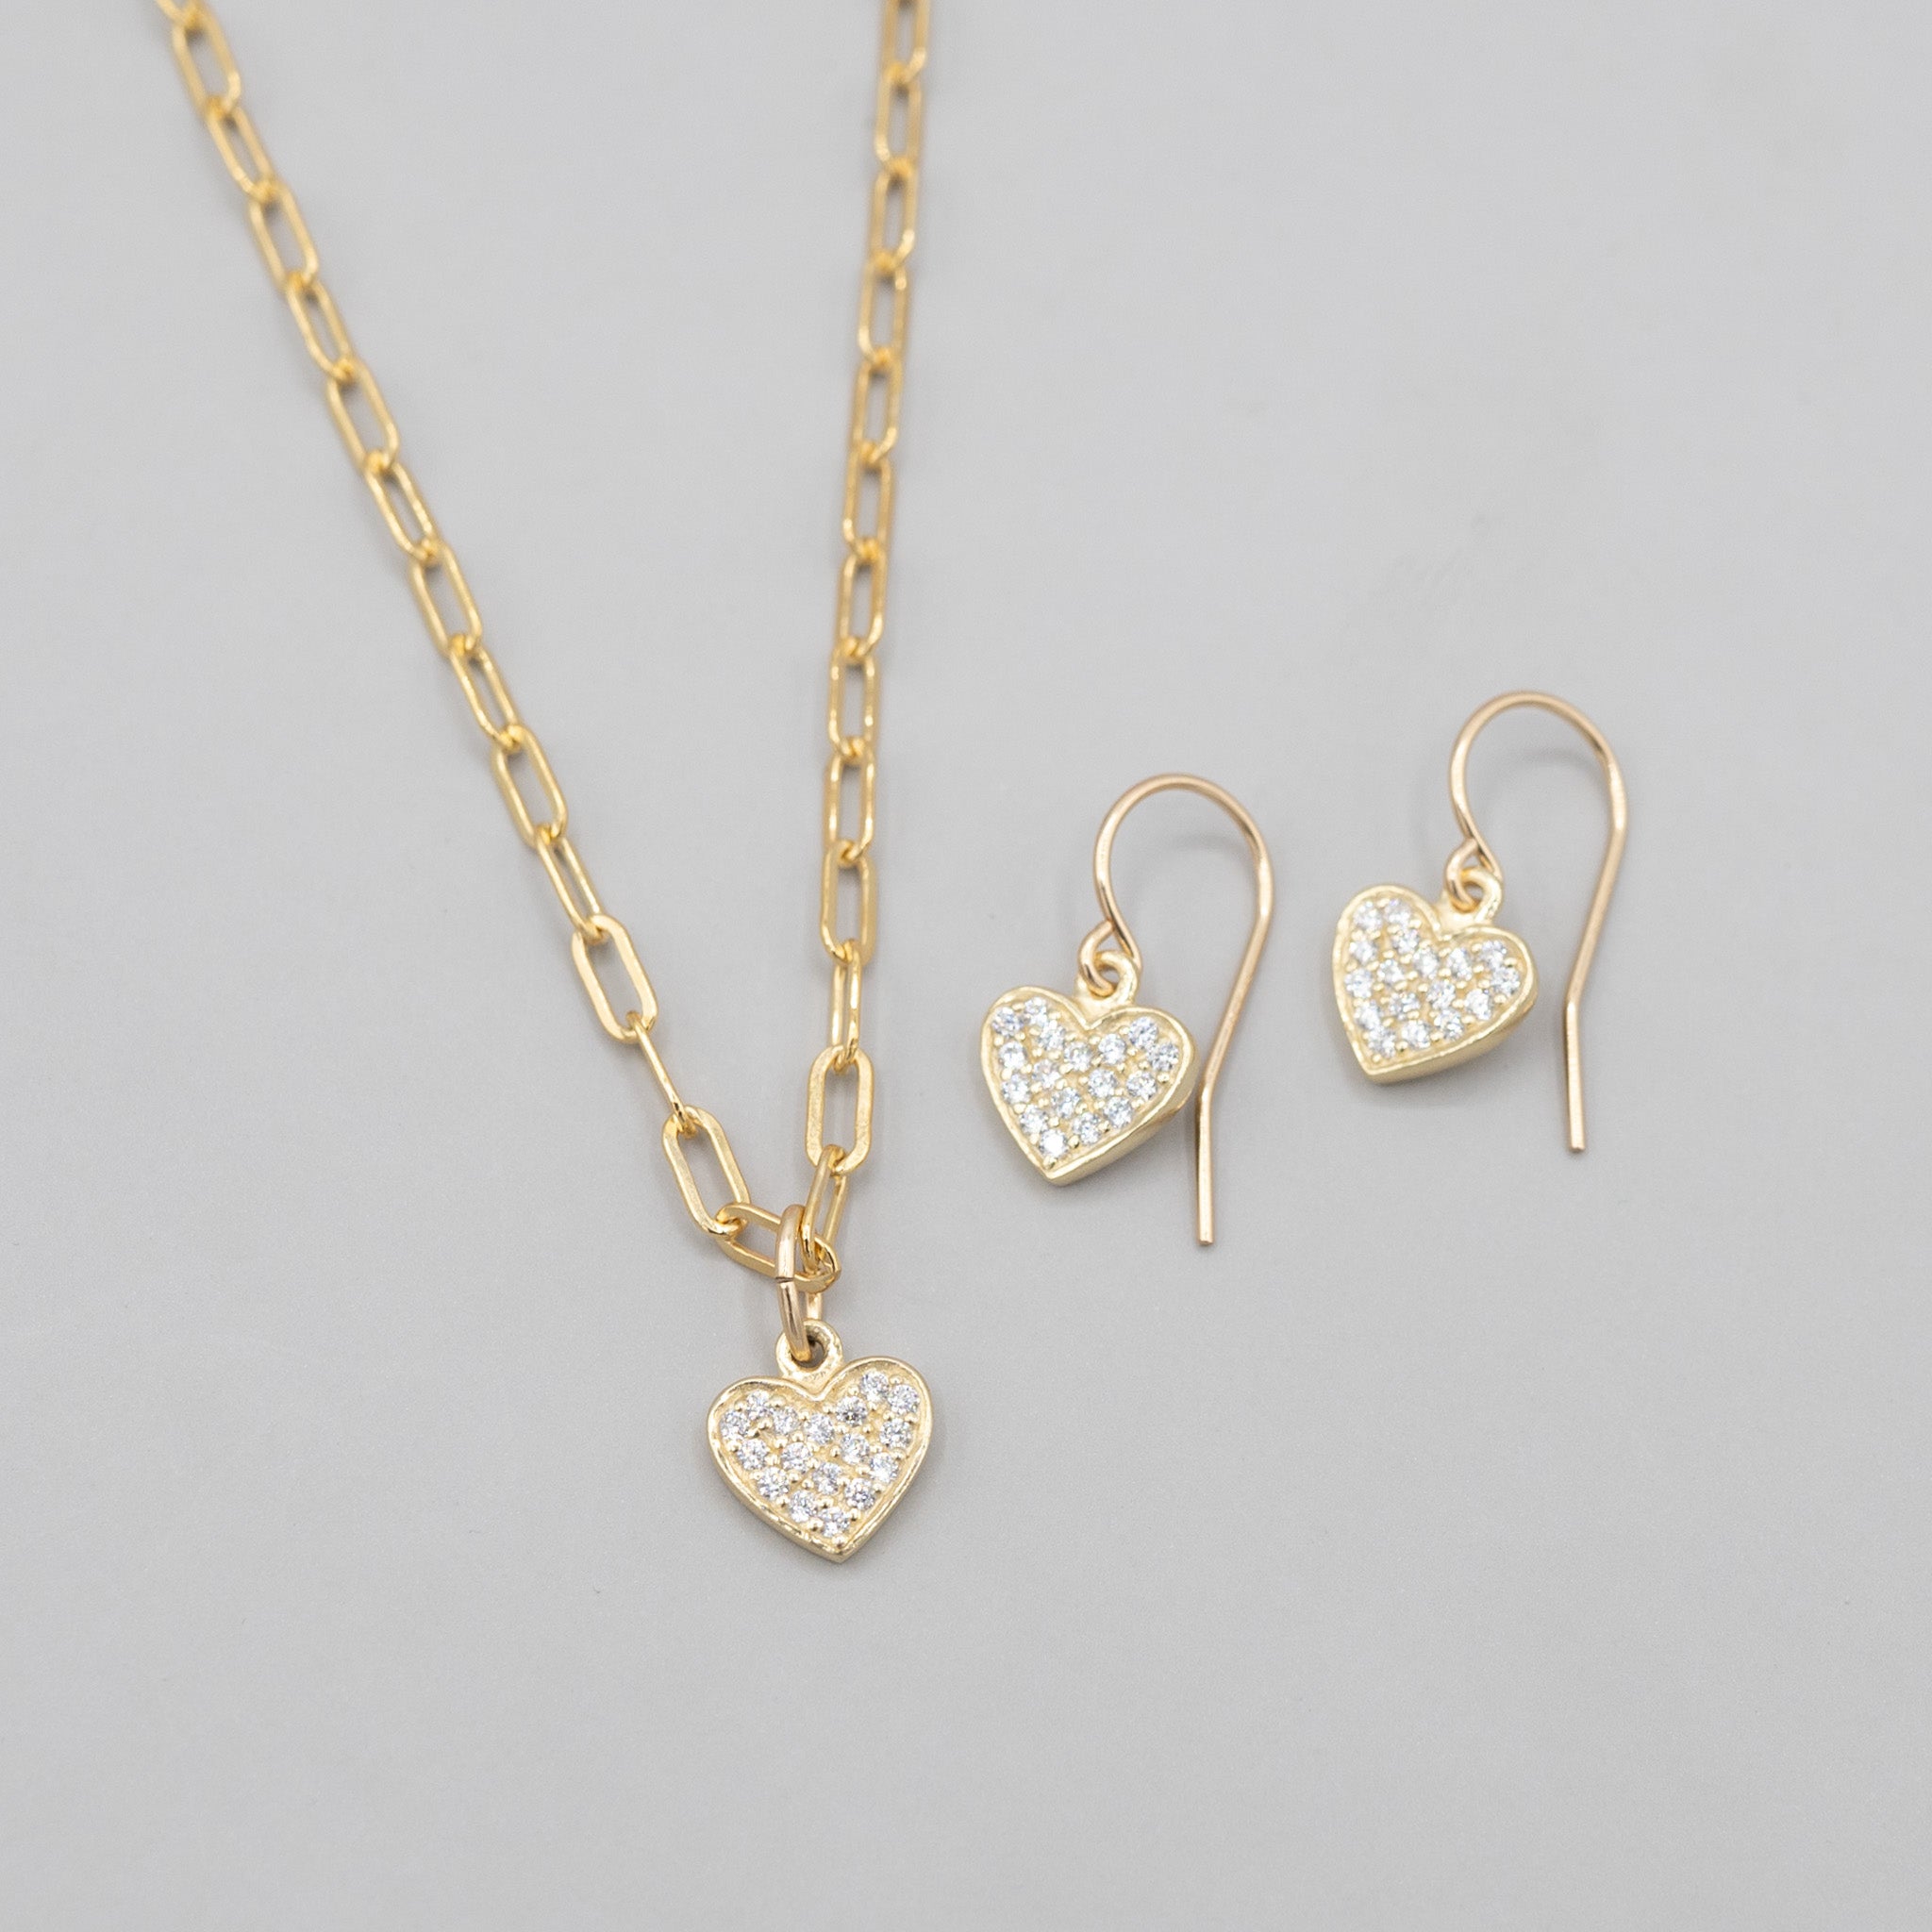 14k Gold Filled Cubic Zirconia Necklace & Earring Set